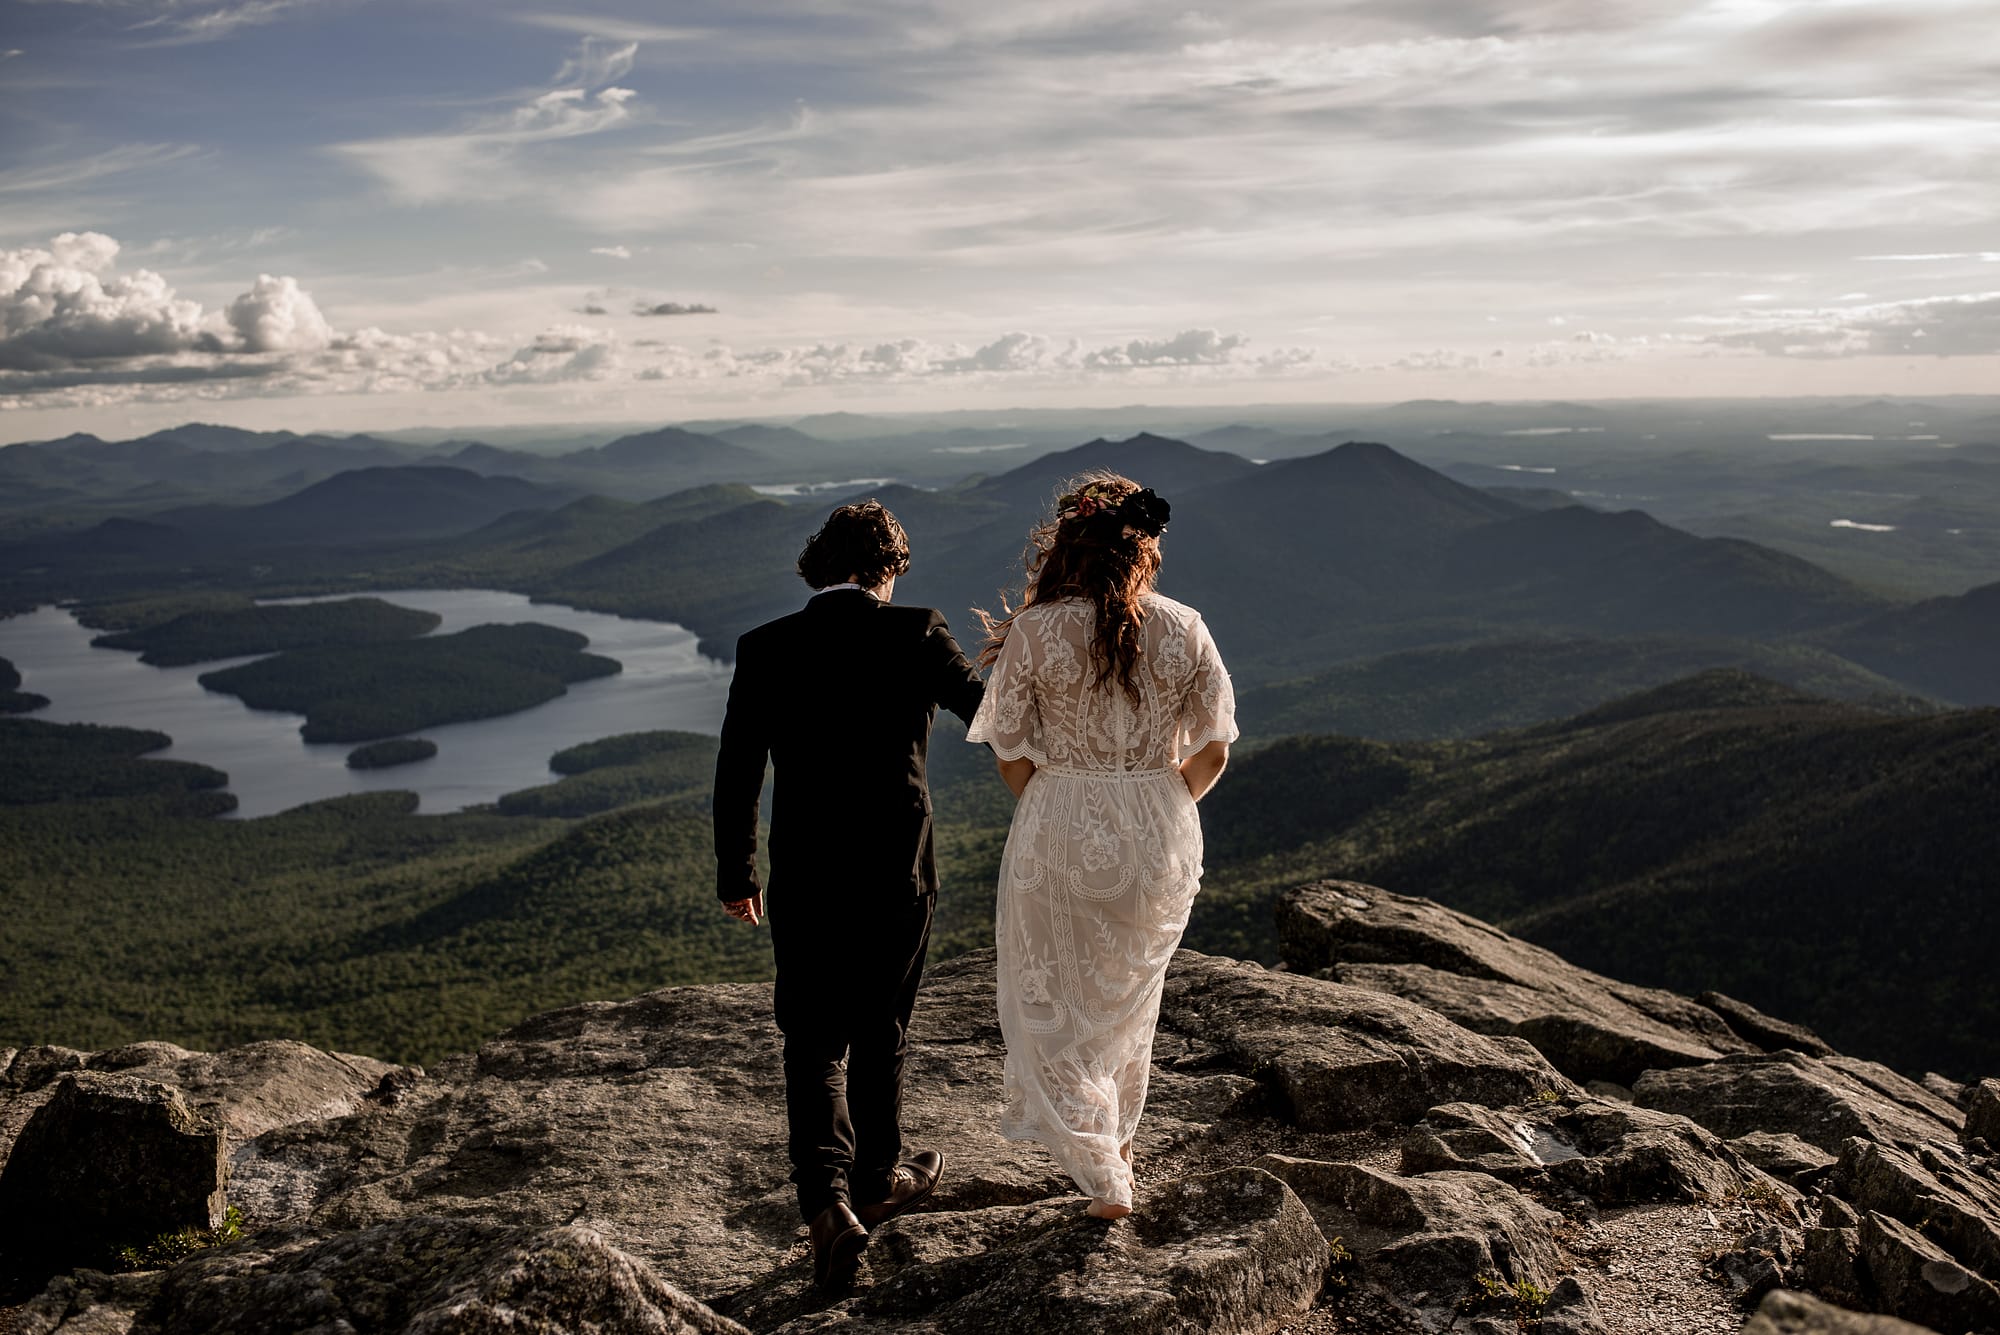 Getting married on top of a mountain